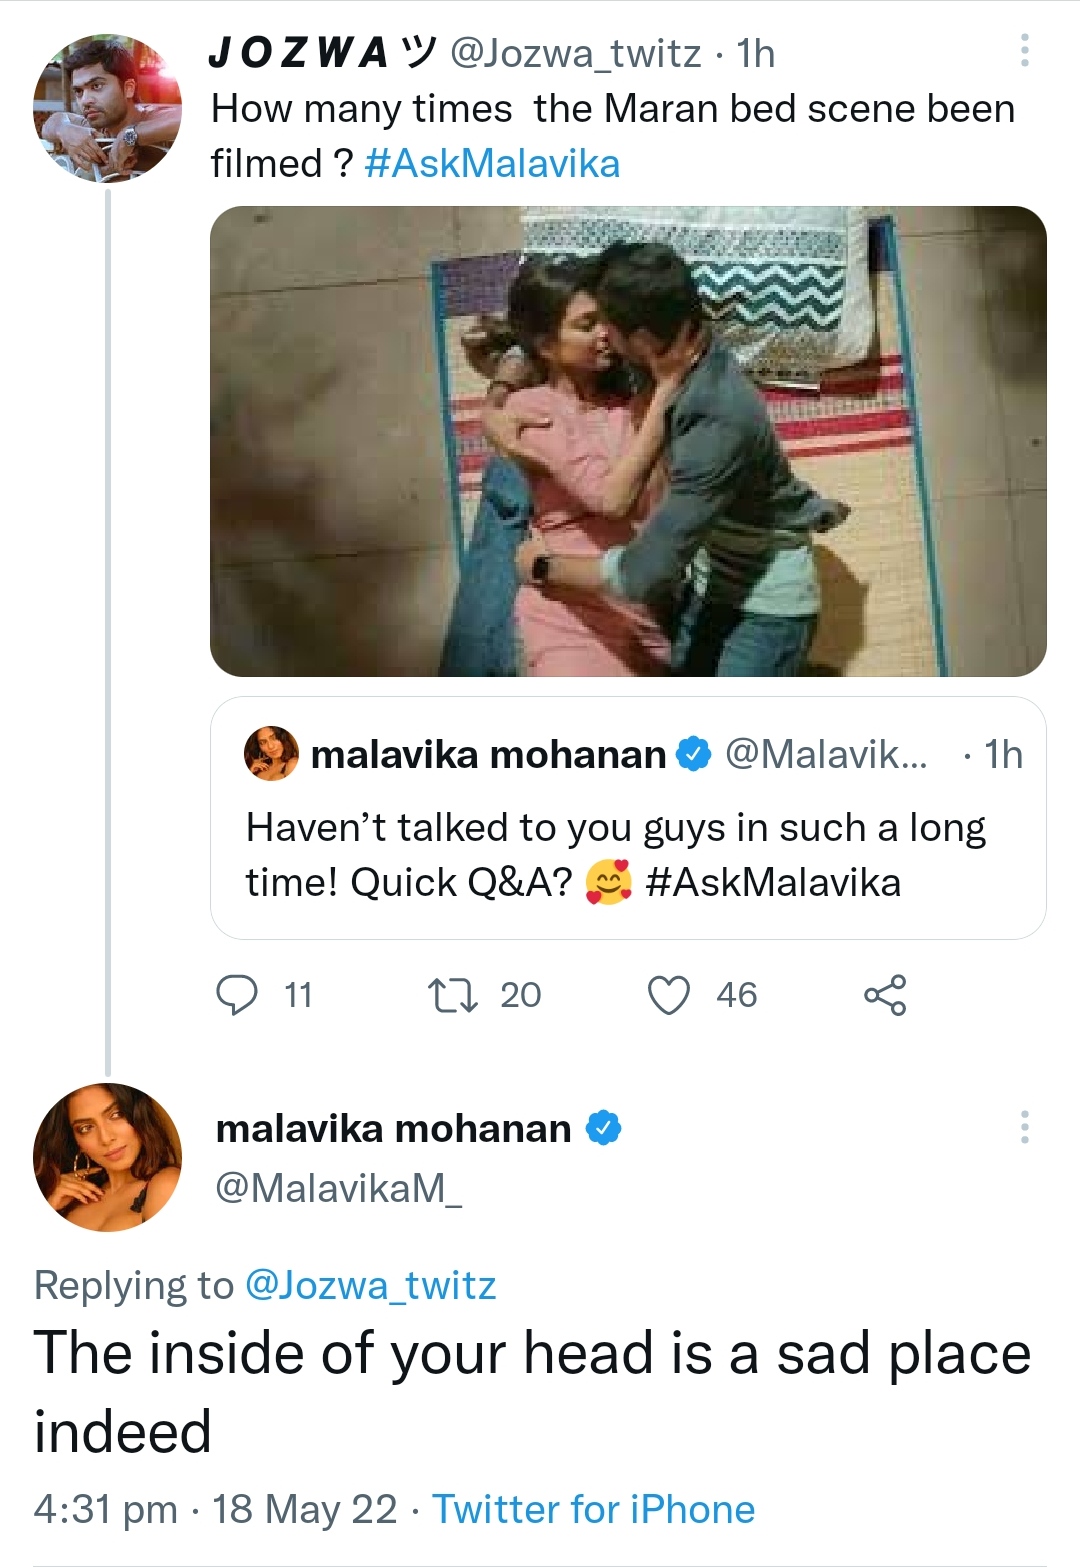 Malavika mohanan answers simply to fan who asked indirect question